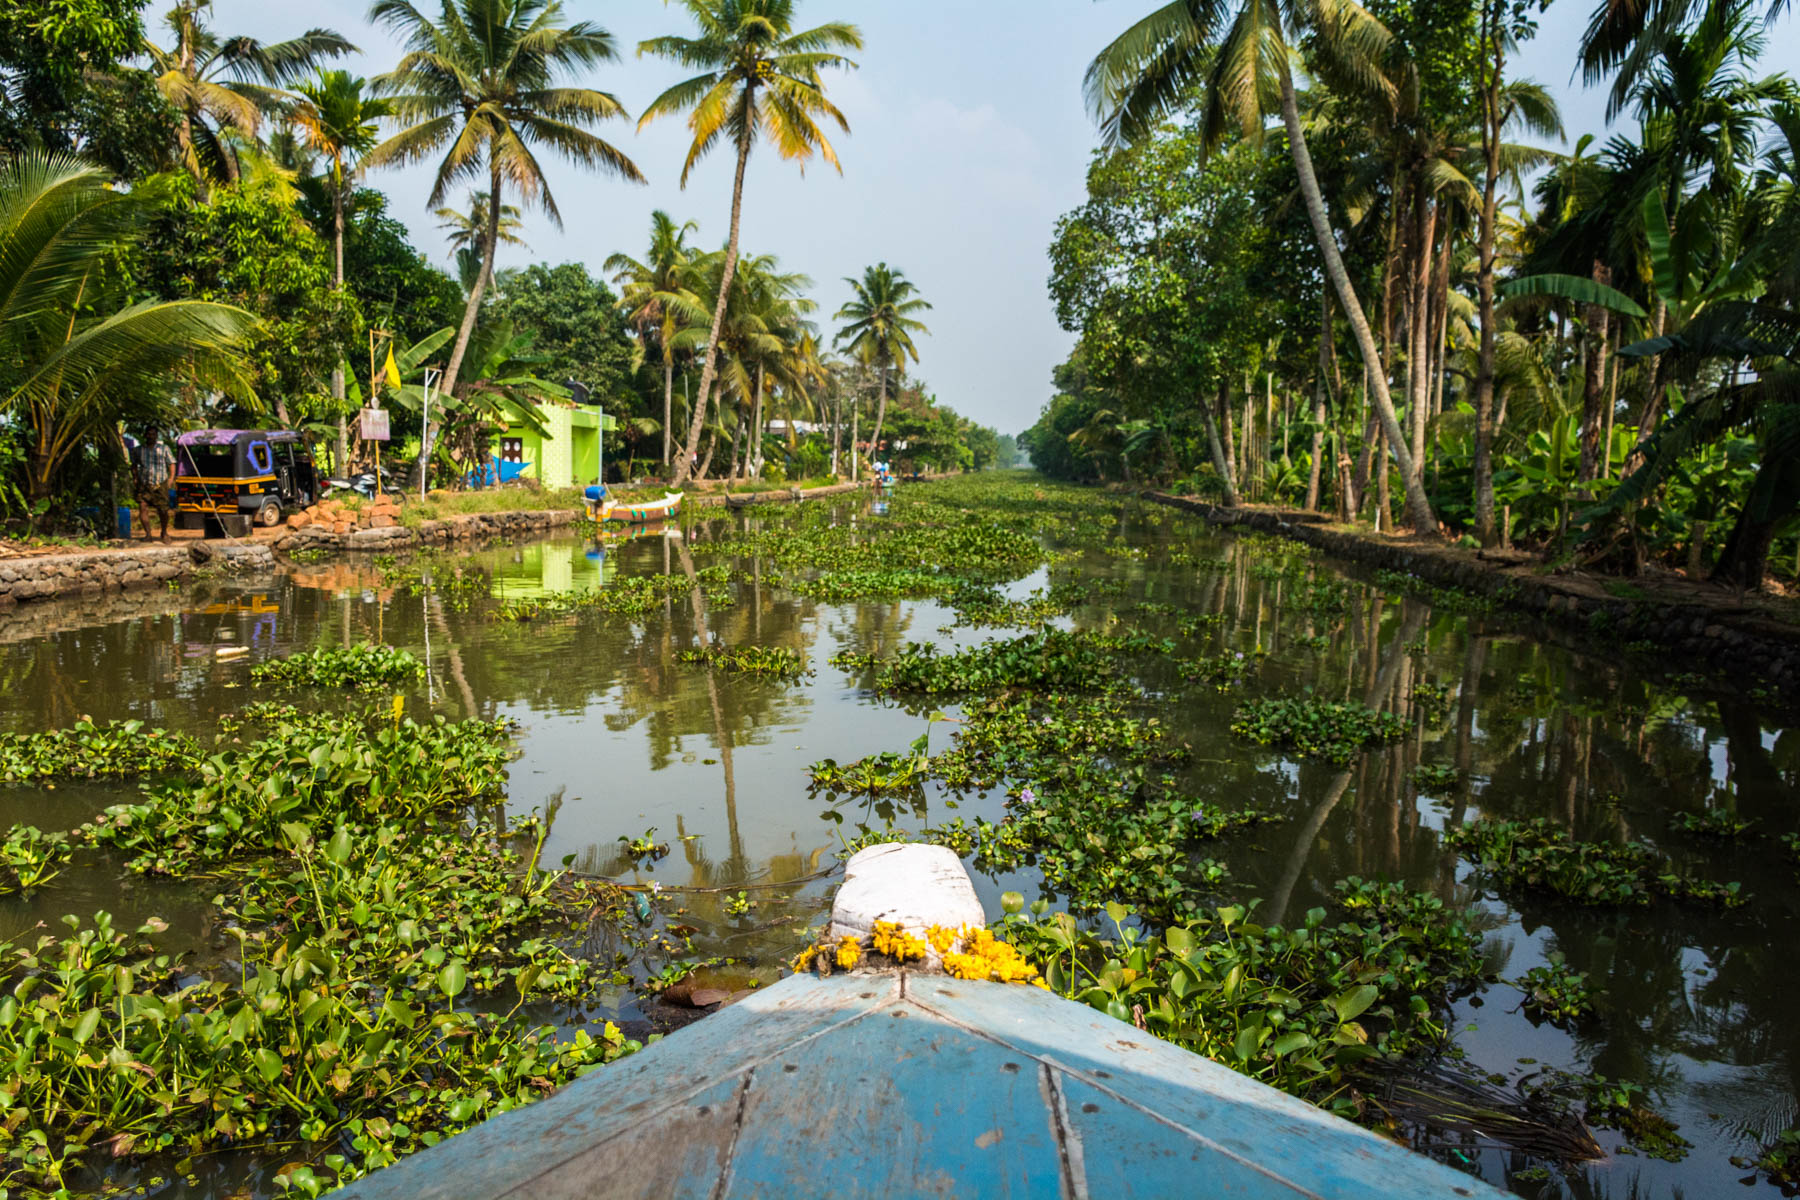 5 Tours for Cruising the Backwaters of Kerala from Alleppey | THE BEST Experience - The Wandering Quinn Travel Blog